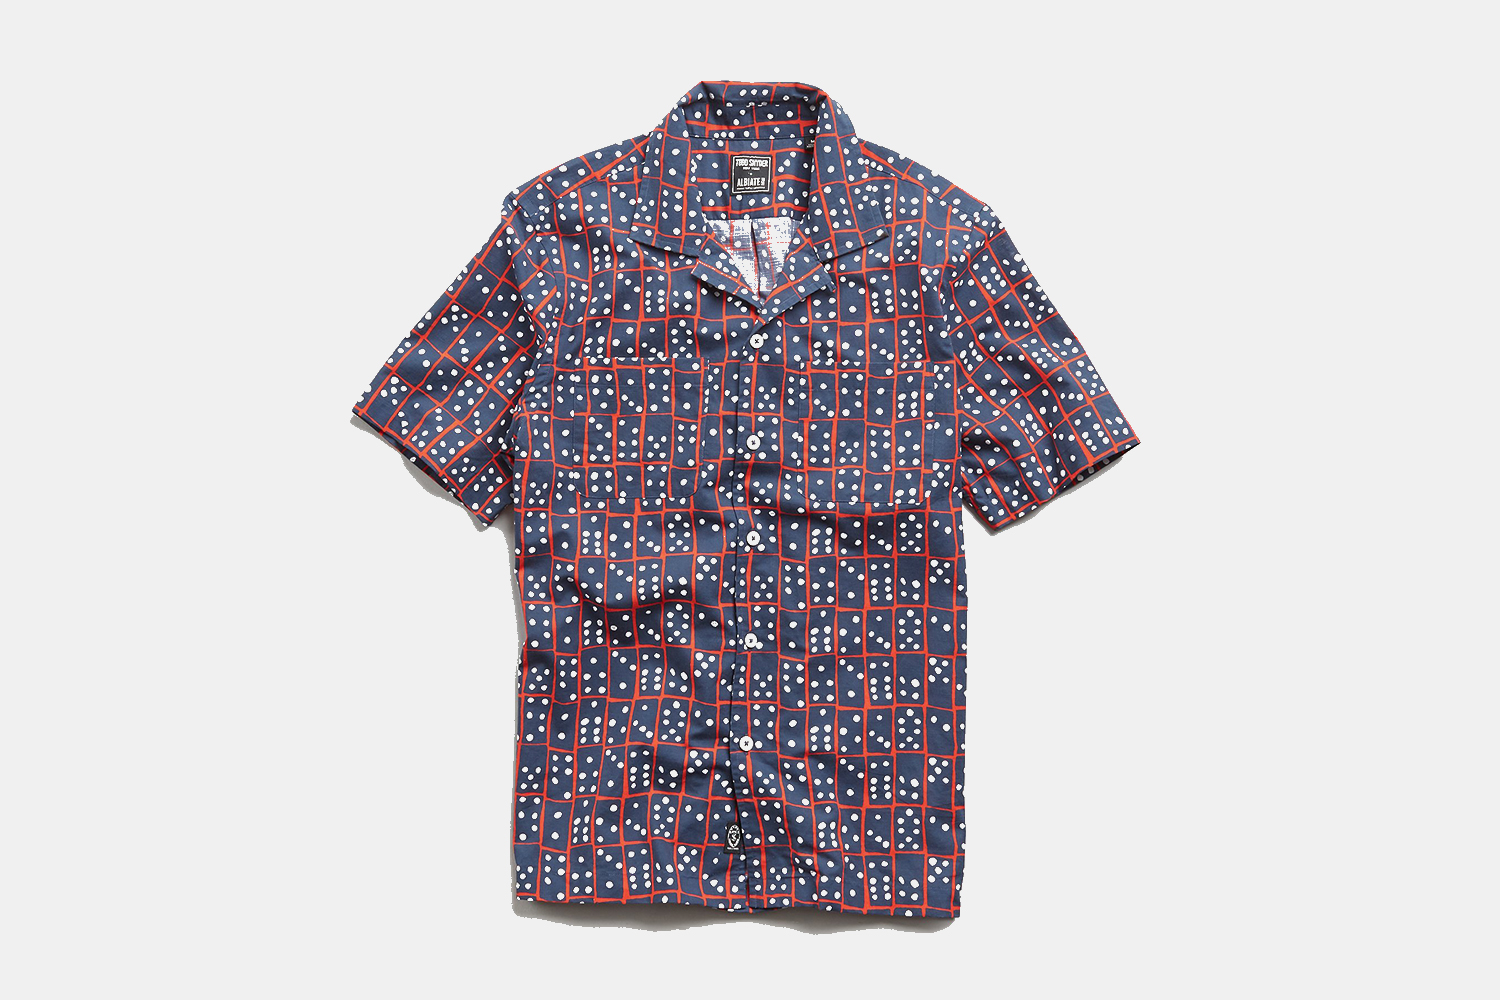 Todd Snyder Made the Perfect Summer Shirt